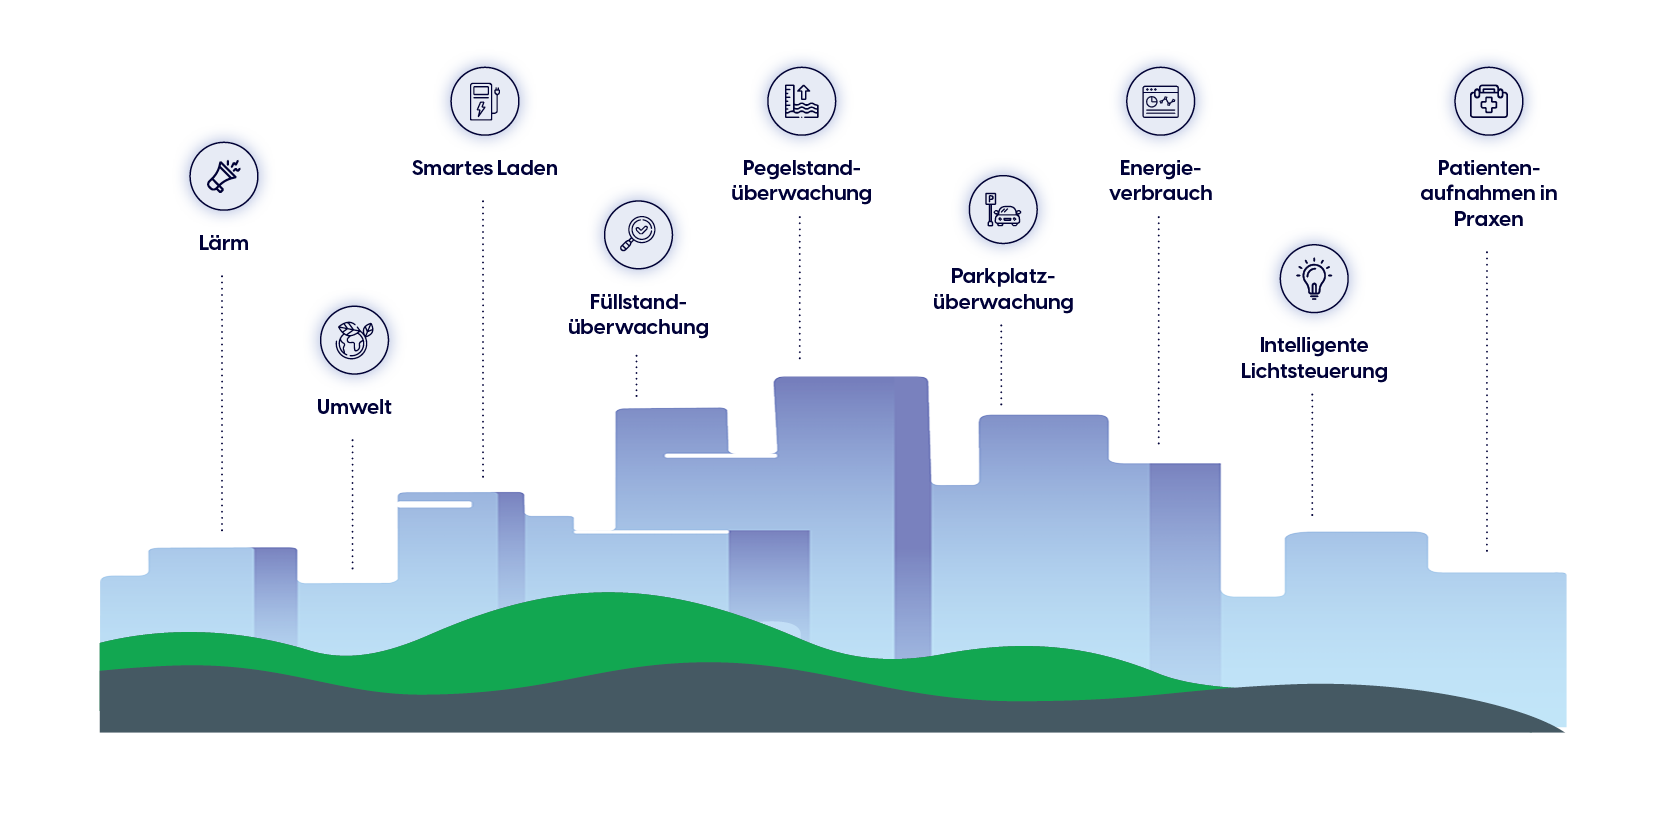 Our Obodo Smart City describes an interface with collected data, concepts and evaluations of modern technologies within an urban environment.